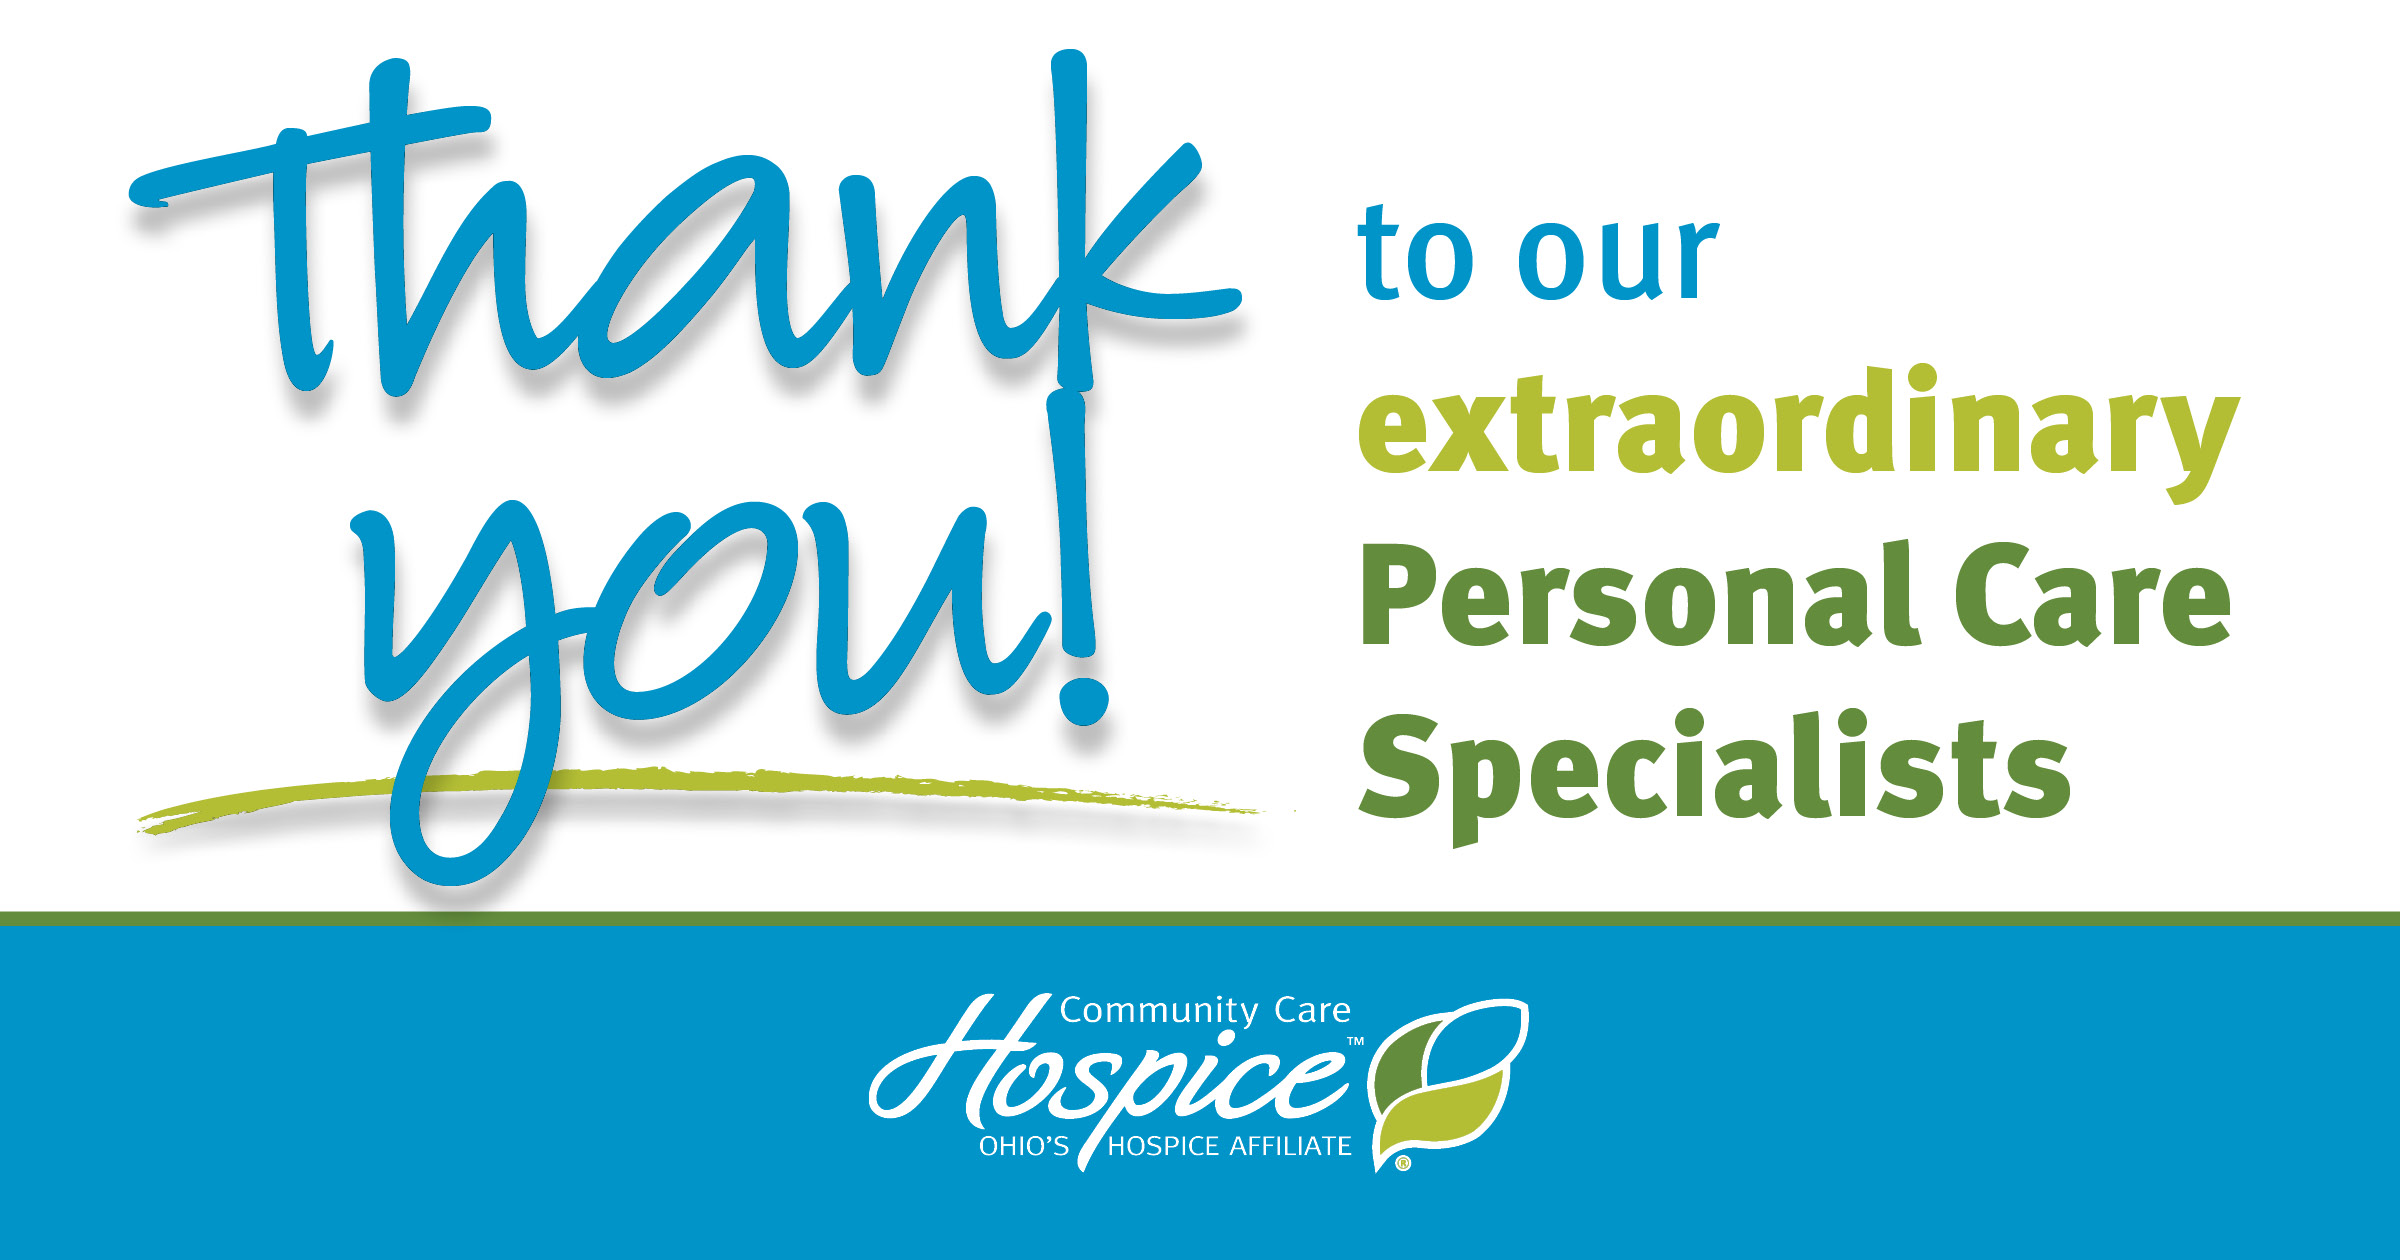 Thank you to our extraordinary Personal Care Specialists!